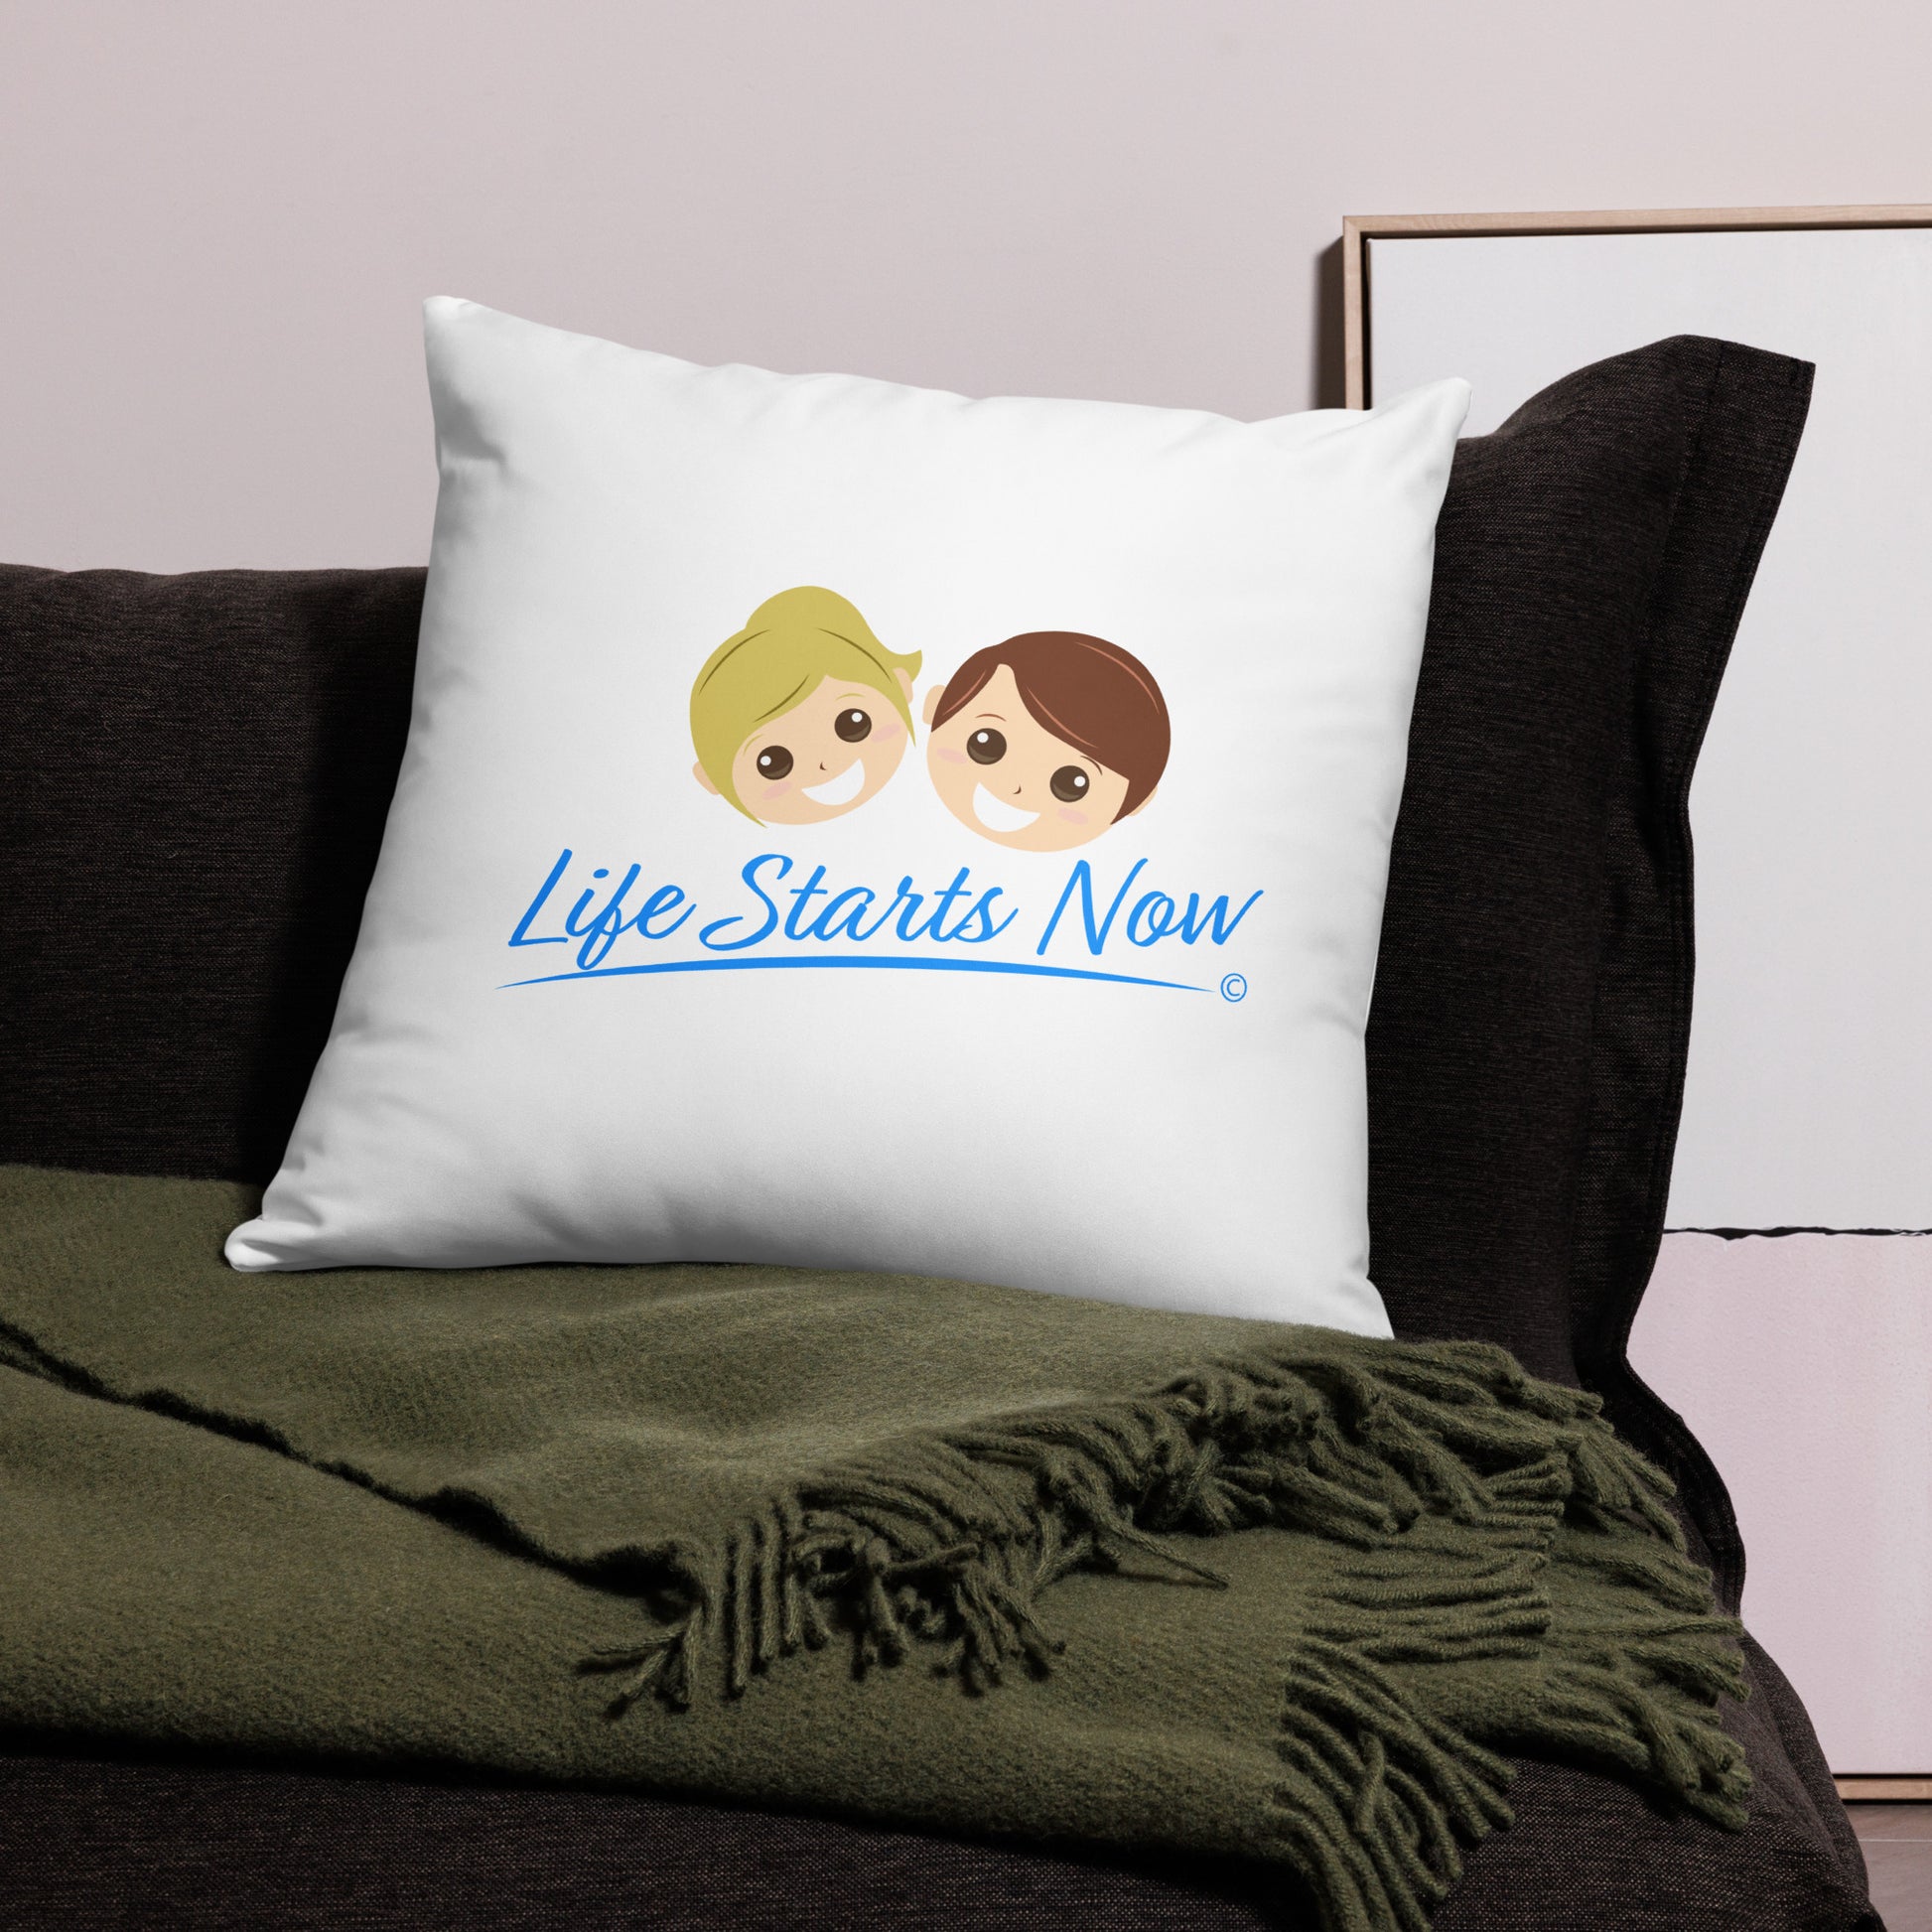 stylish 22x22 throw  pillow on a black bed, displaying the uplifting message 'Life Starts Now. There's a green blanket beside it